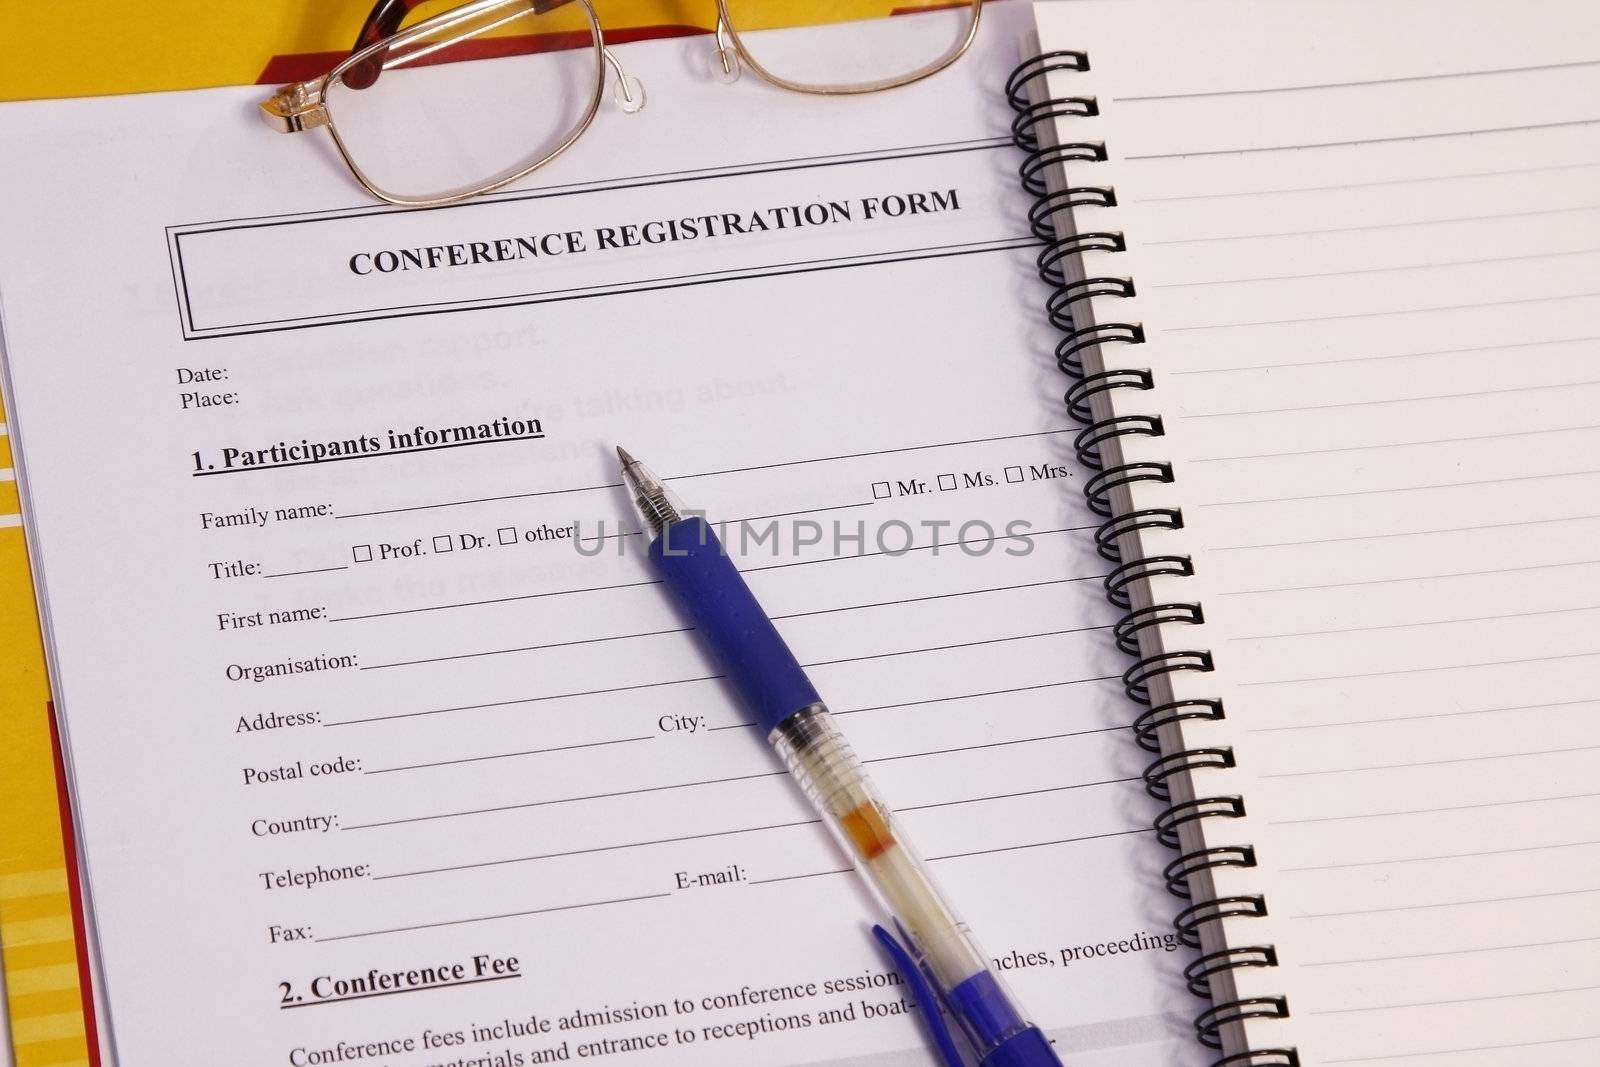 Conference registration form - many uses for seminars and training materials.